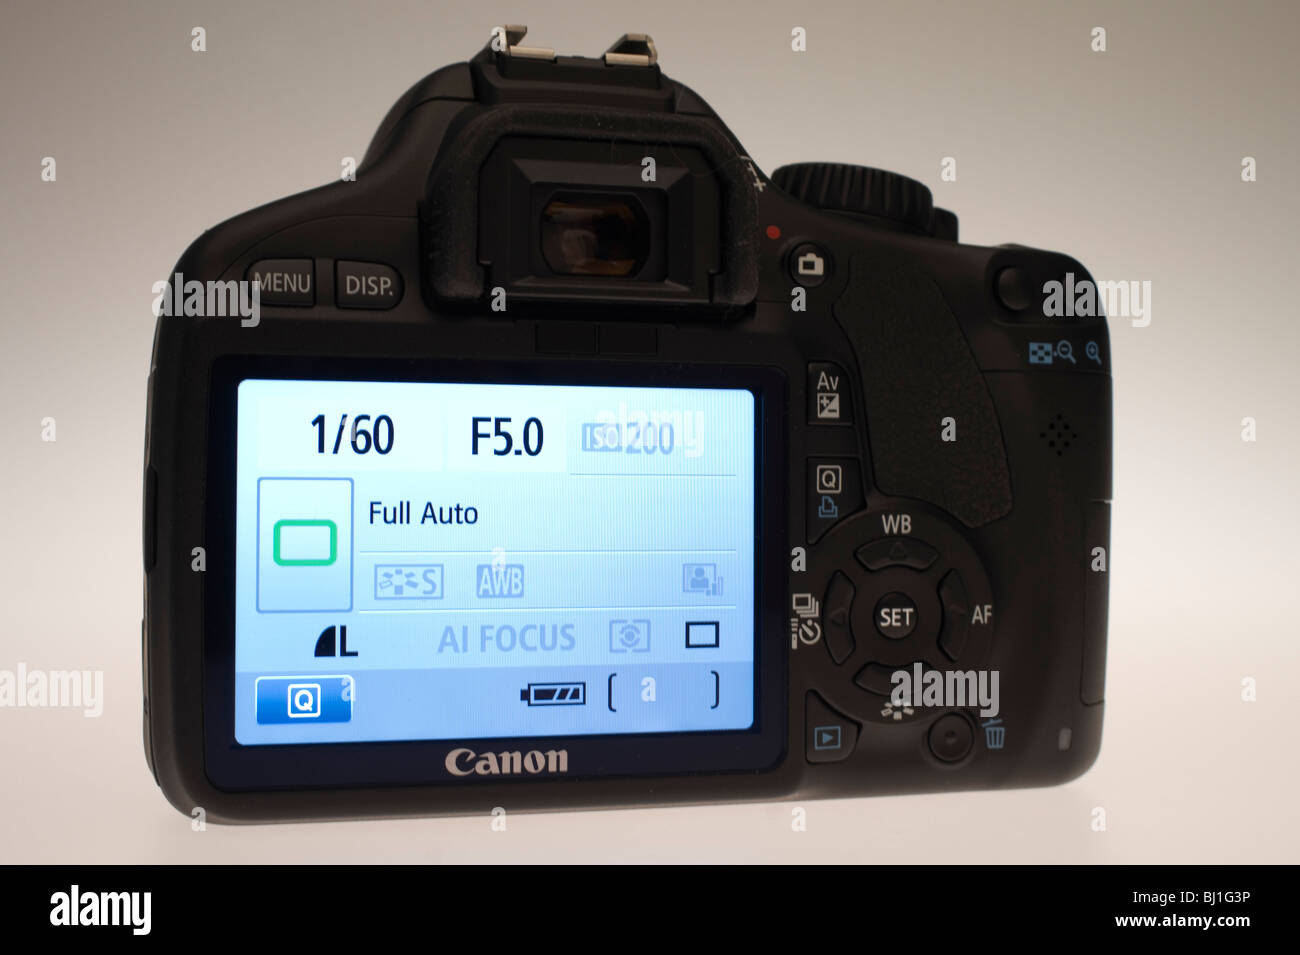 Canon EOS 550D or Digital Rebel 2Ti digital SLR camera with movie function  March 2010. Rear 3 inch LCD showing user interface Stock Photo - Alamy